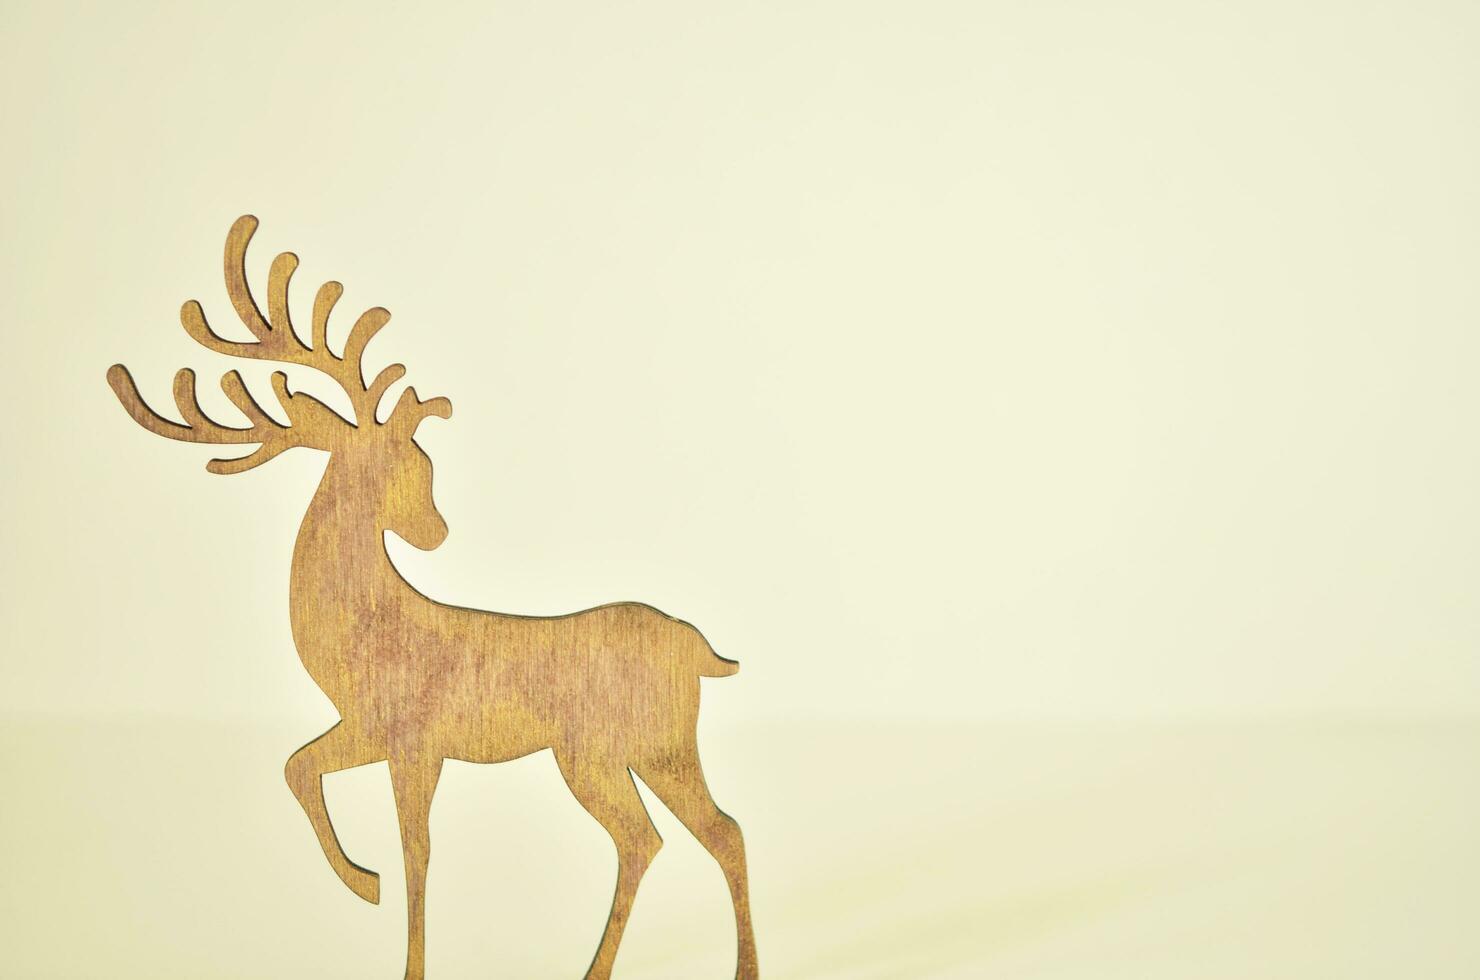 Christmas background with deer silhouette. photo